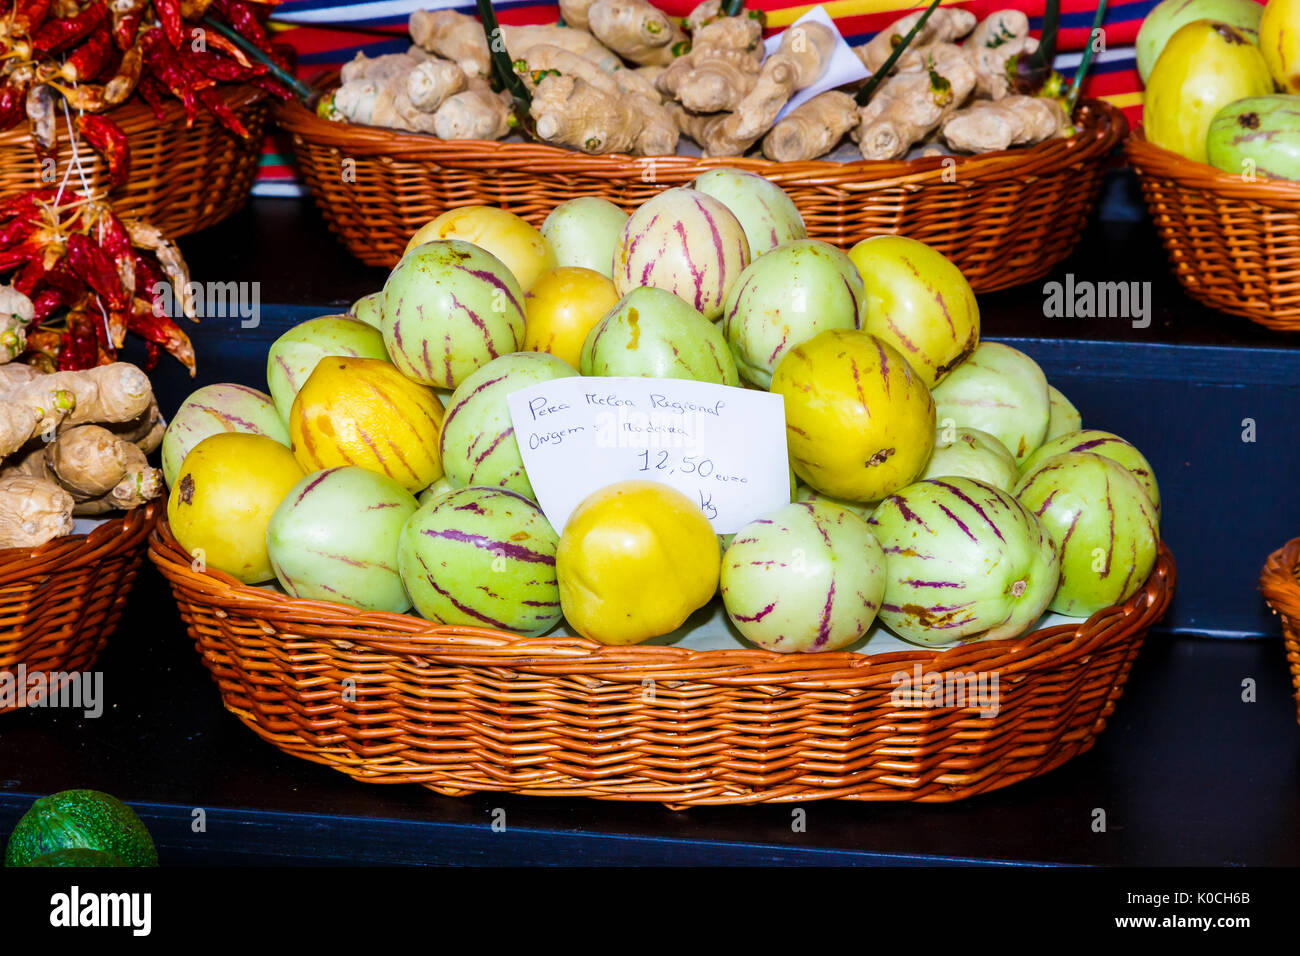 Pera melon or pepino dulce fruits (Solanum muricatum) in a basket. Fruits and vegetables stall. Stock Photo